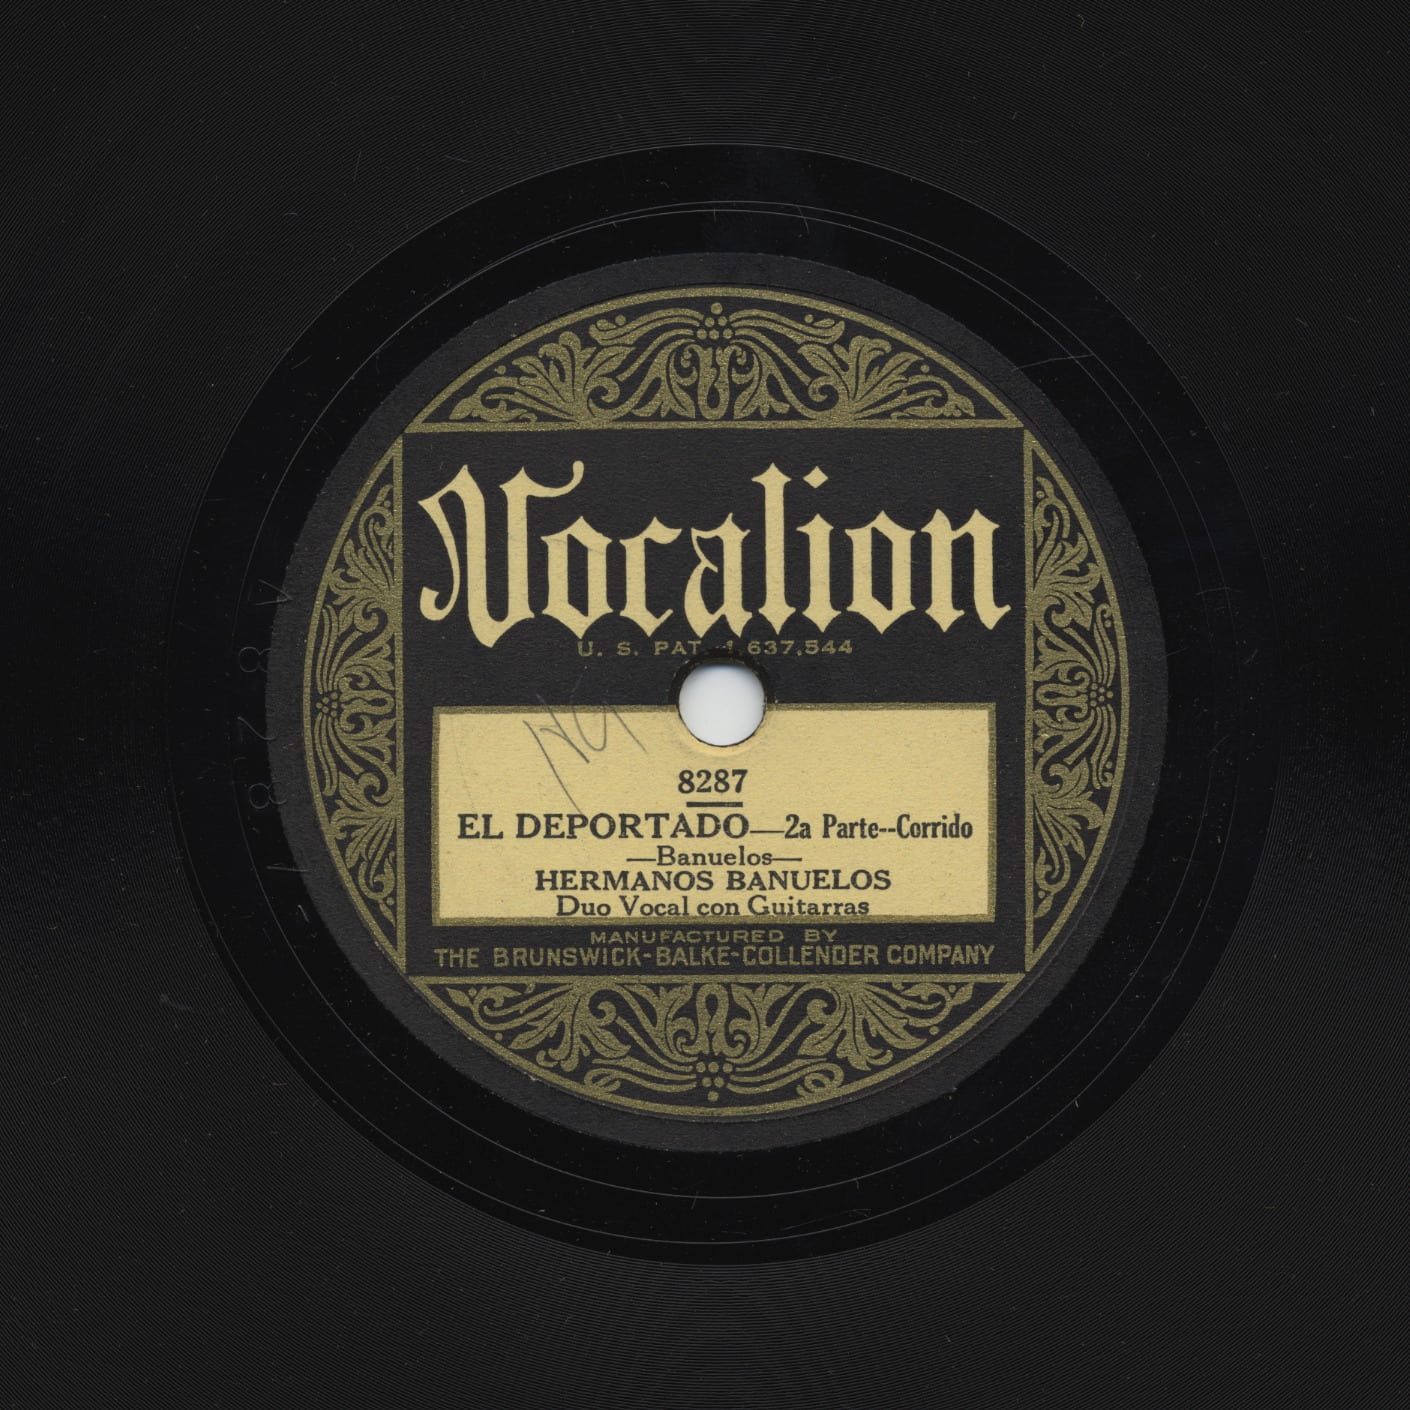 A black record with ornate gold design called "vocalion"